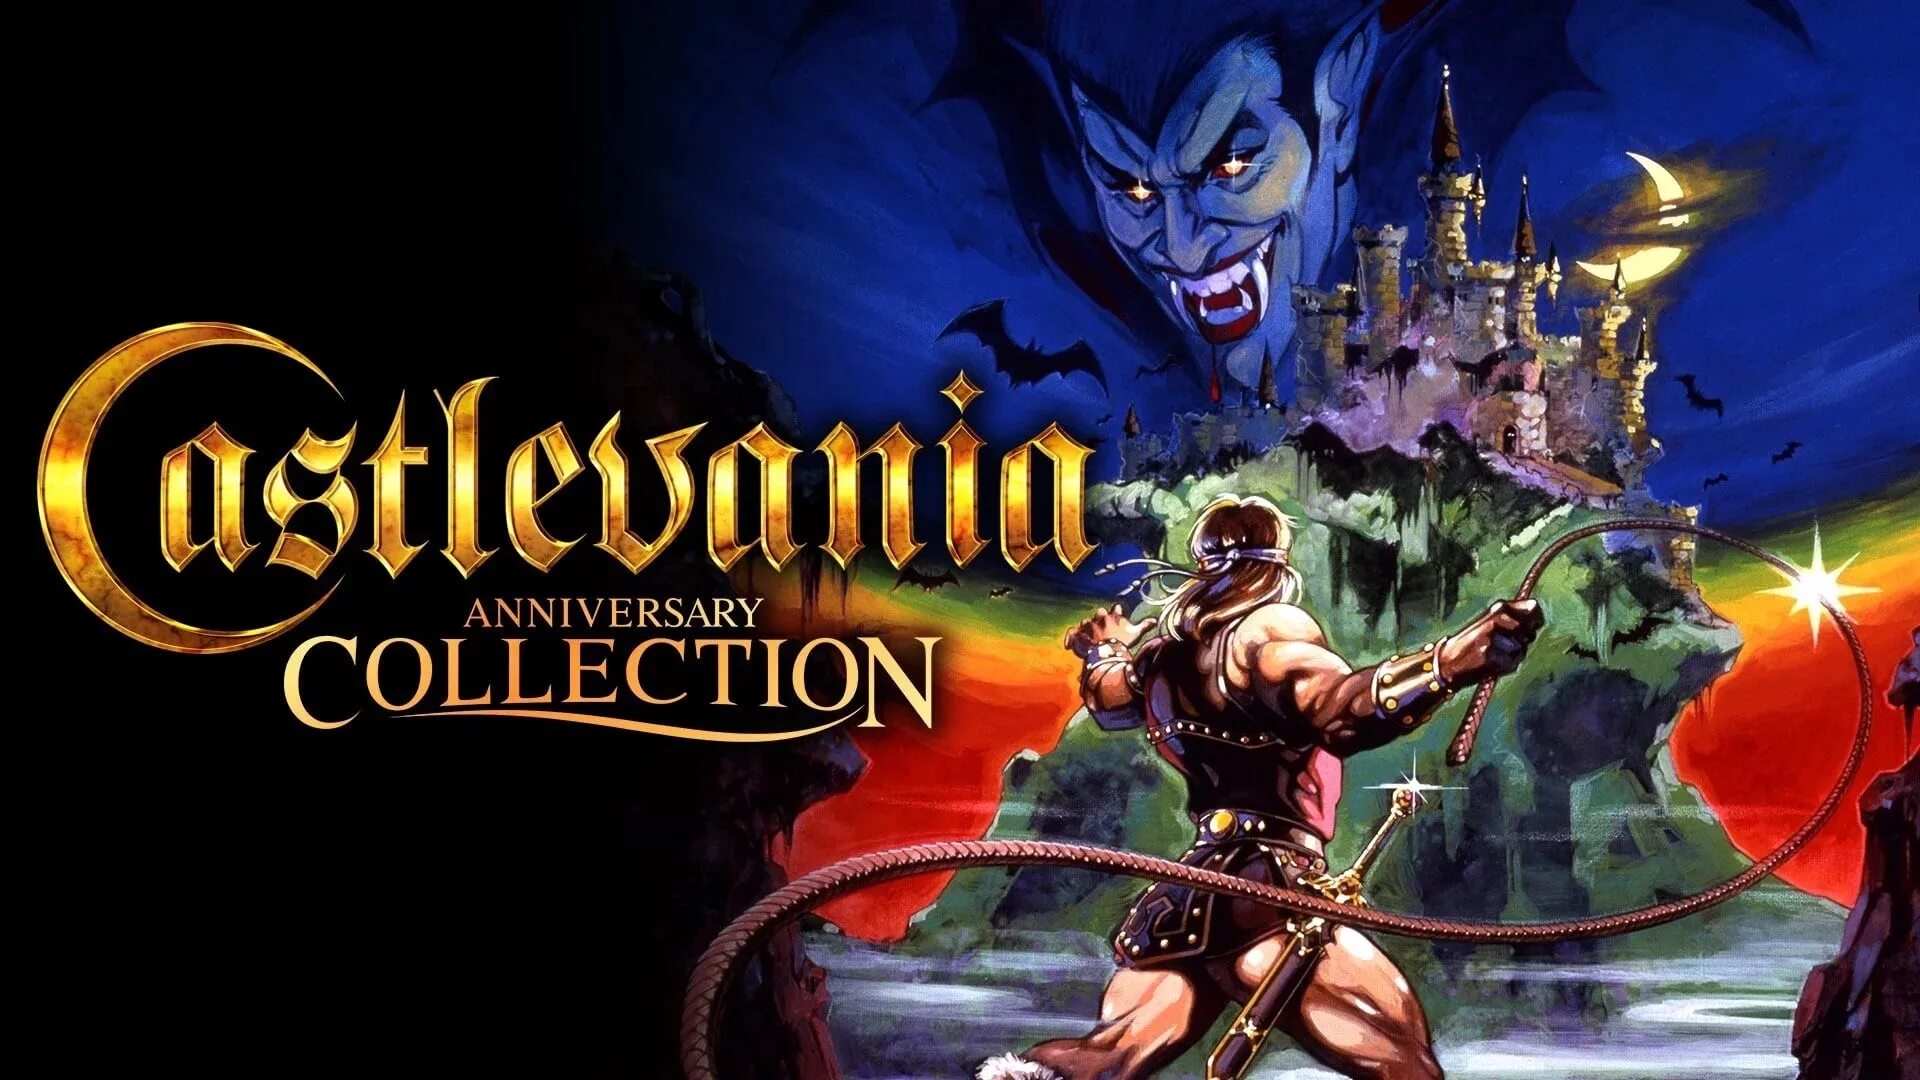 Classic games collection. Castlevania Anniversary collection. Игра Castlevania Anniversary collection. Игра на Нинтендо Castlevania. Castlevania Advance collection Switch.